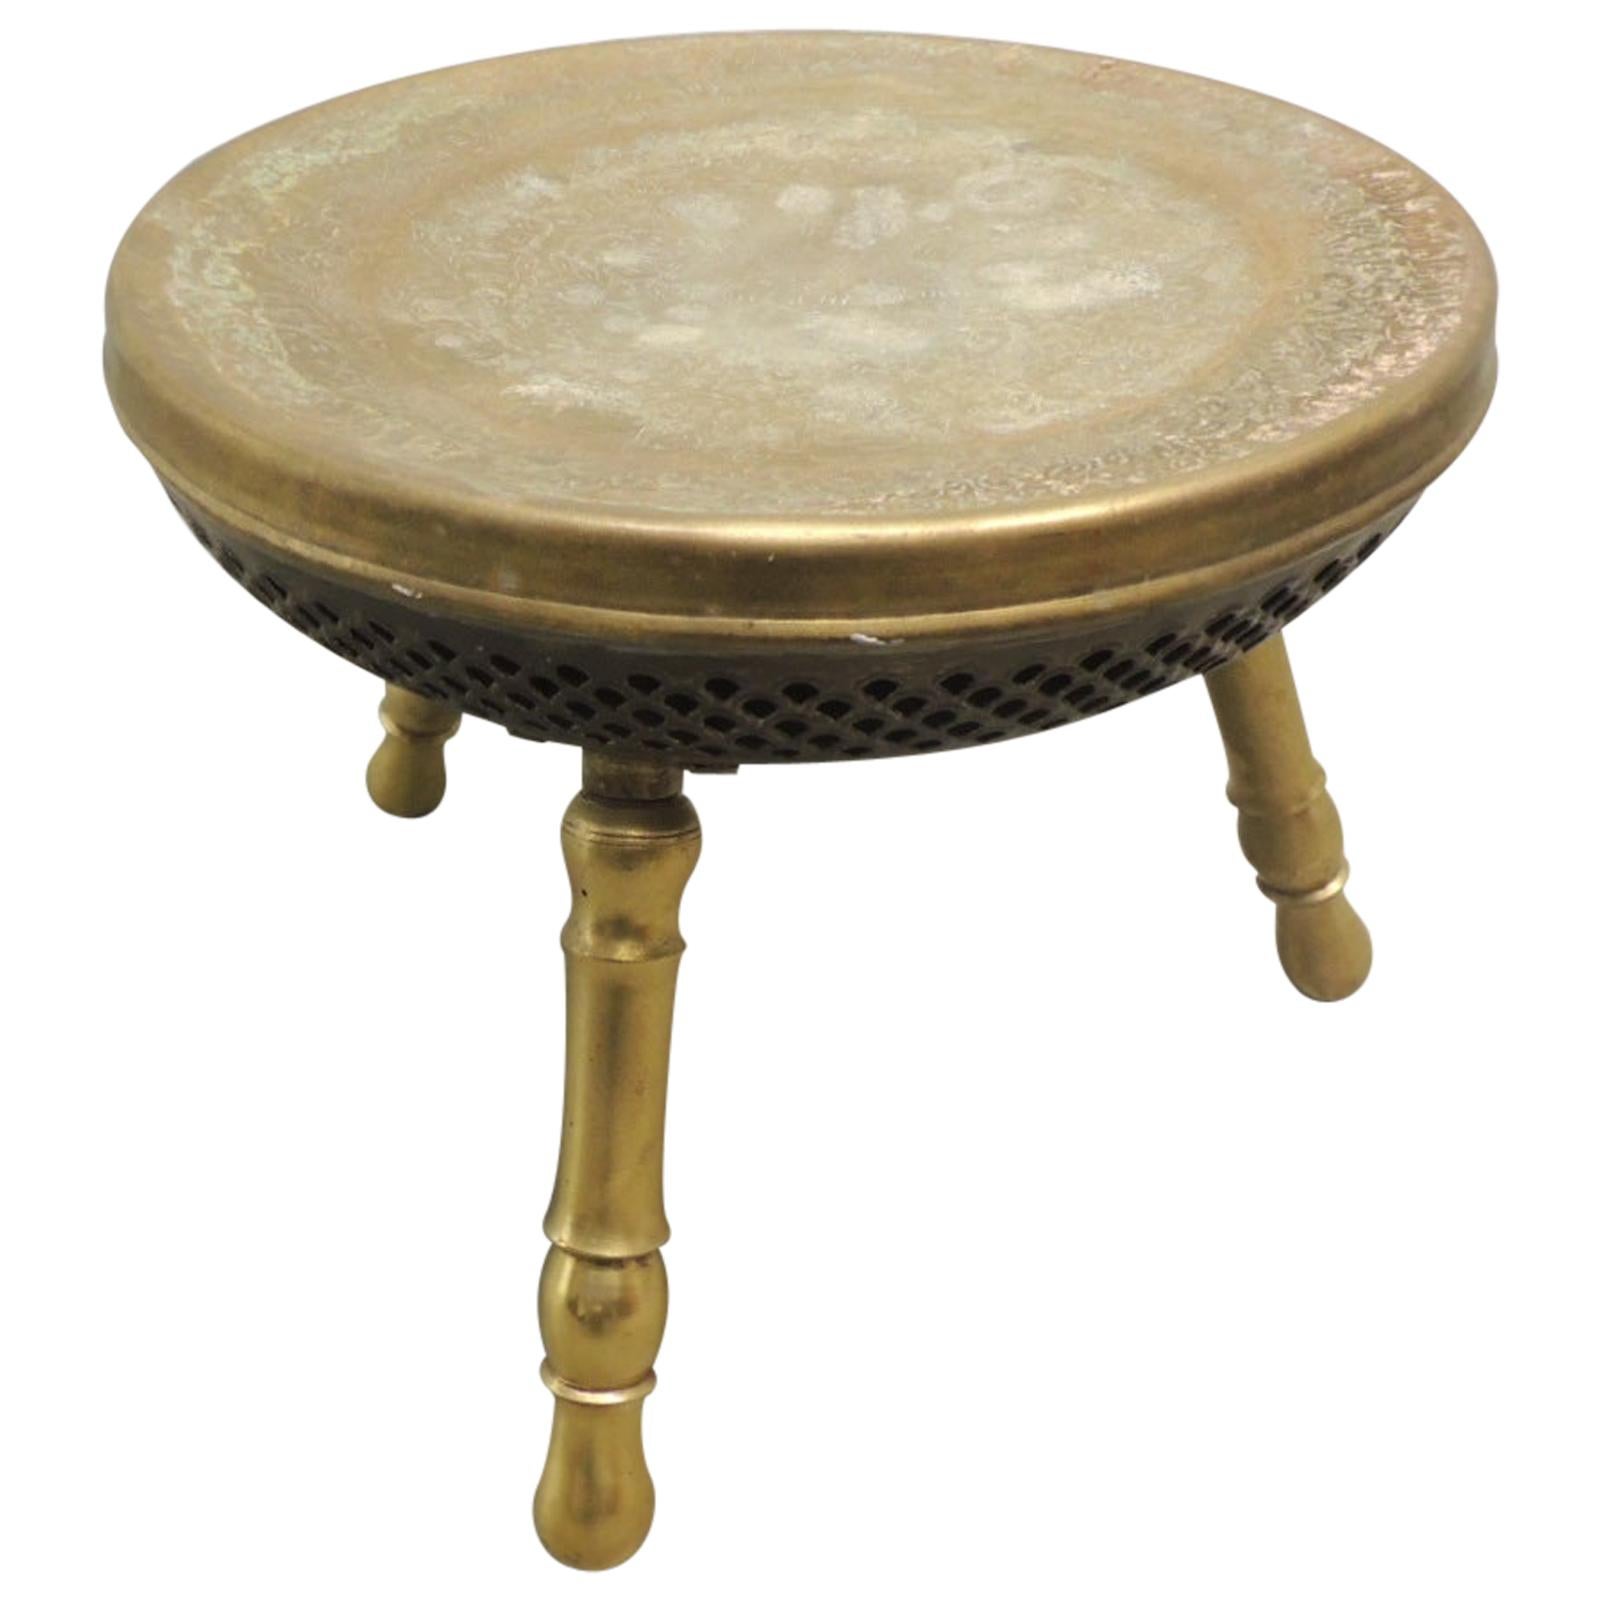 Vintage Round Brass Indian Stool with Tripod Legs